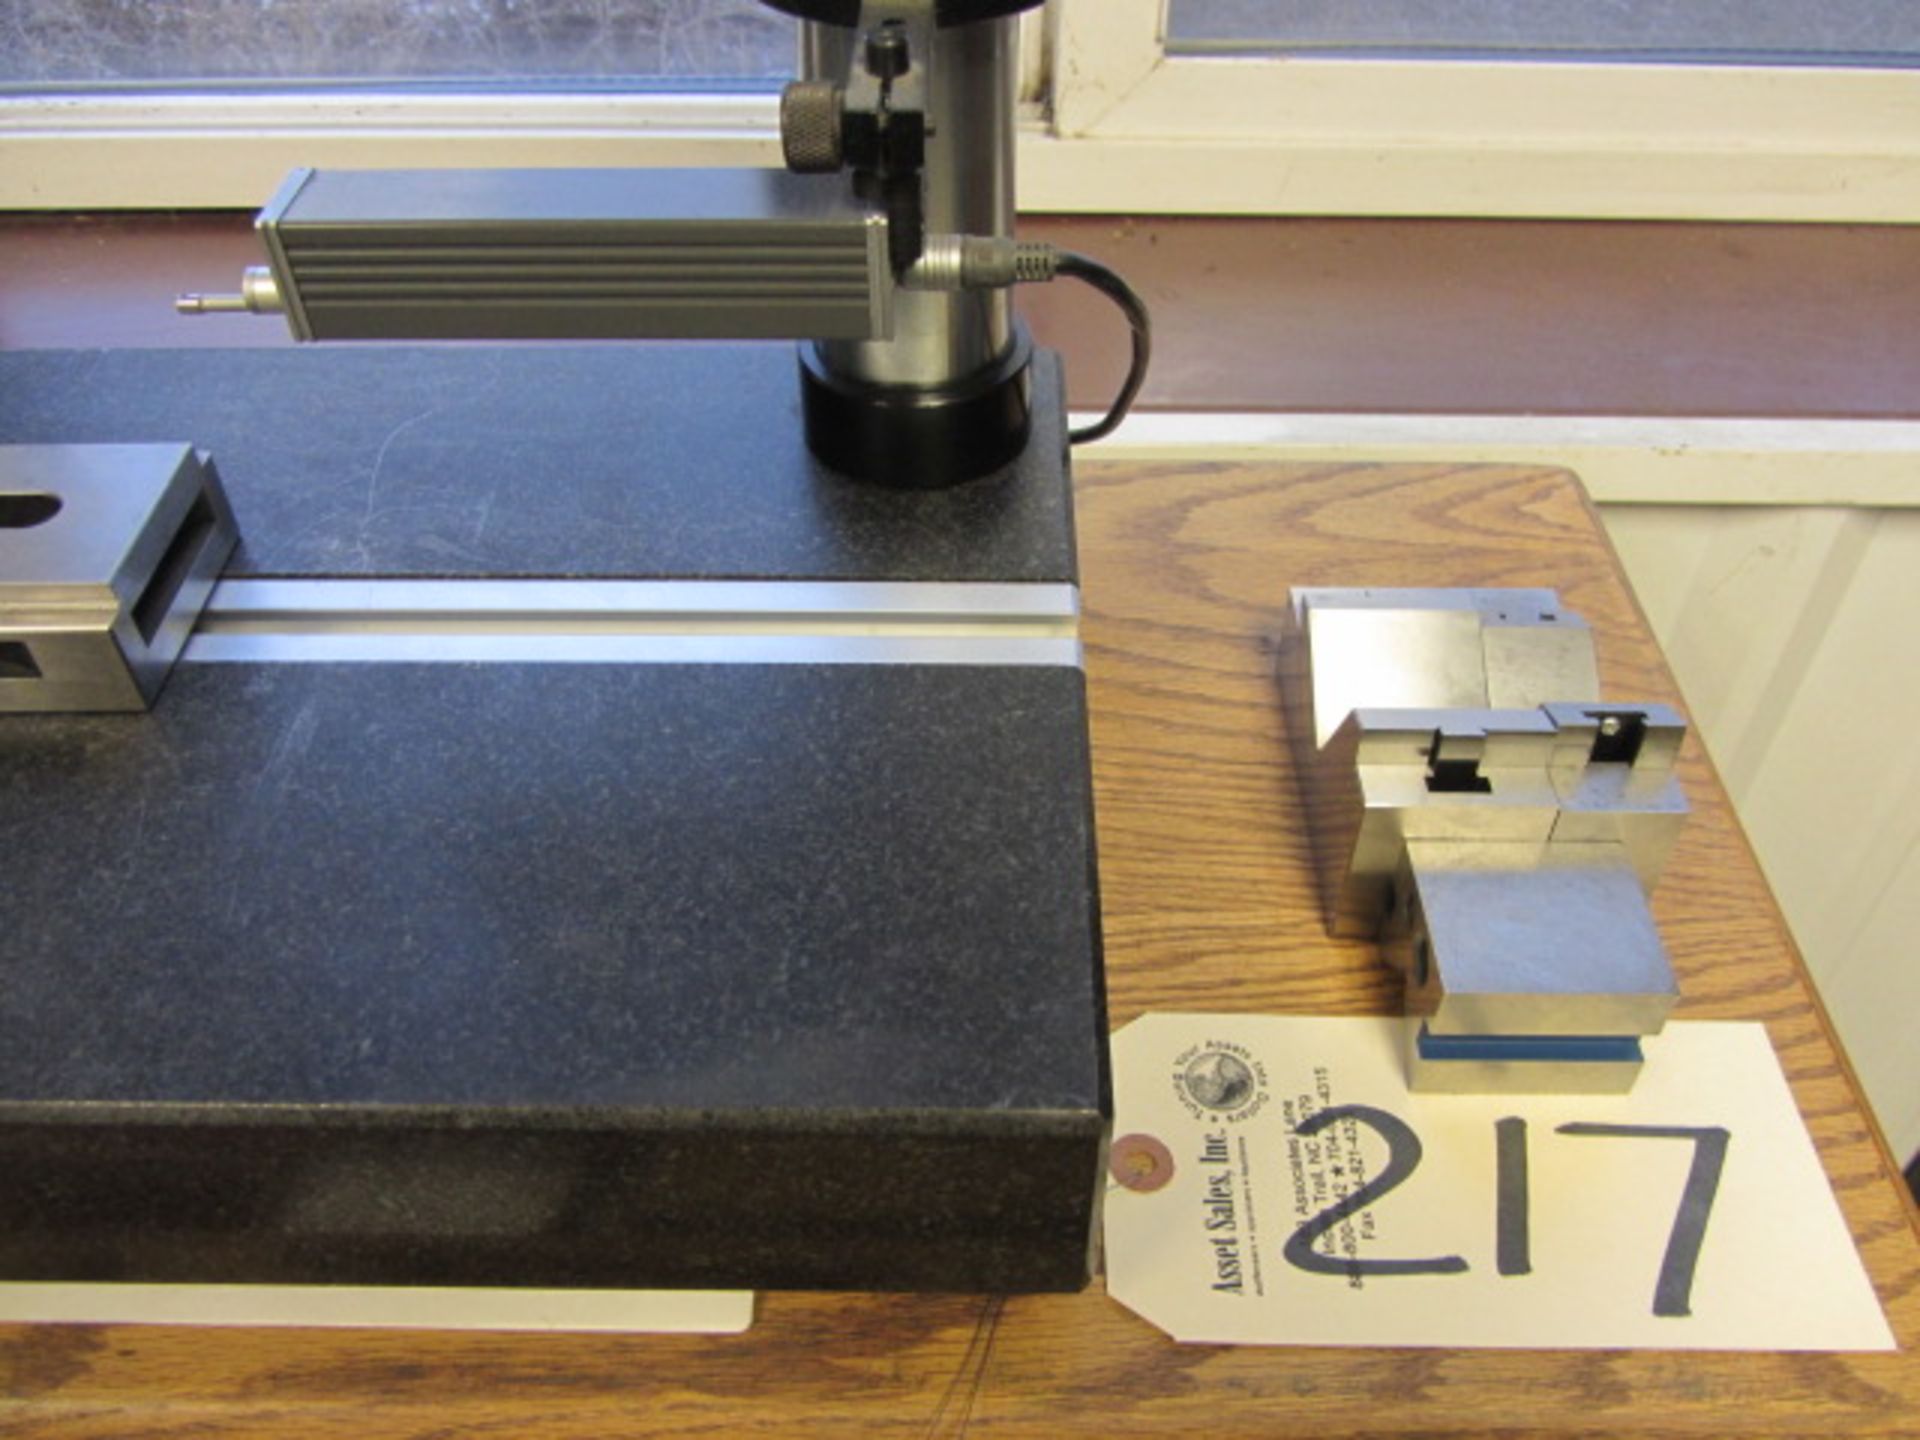 Mitutoyo Granite Surface Plate with SJ-201P Surftest - Image 2 of 4